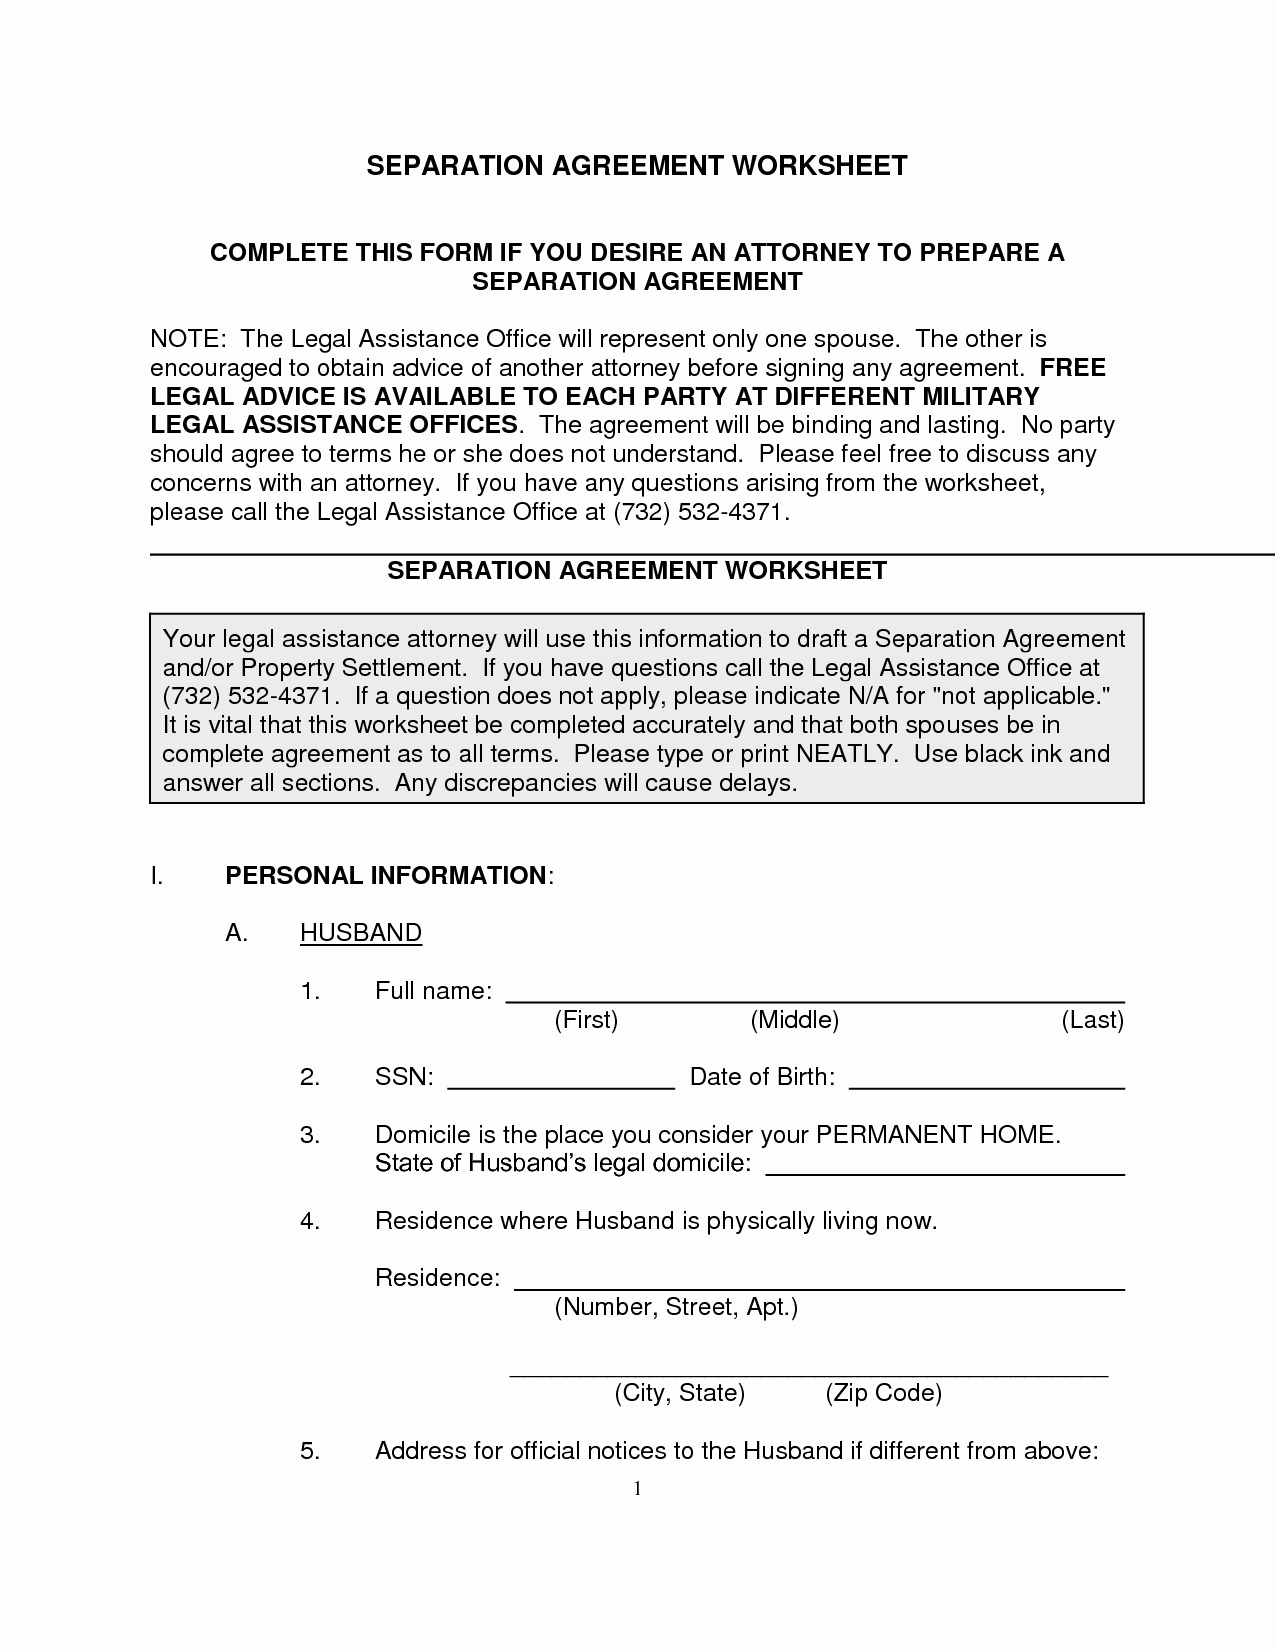 Nc Separation Agreement Template Beautiful Free Legal Separation Agreement form Nc Nc Fice Of the